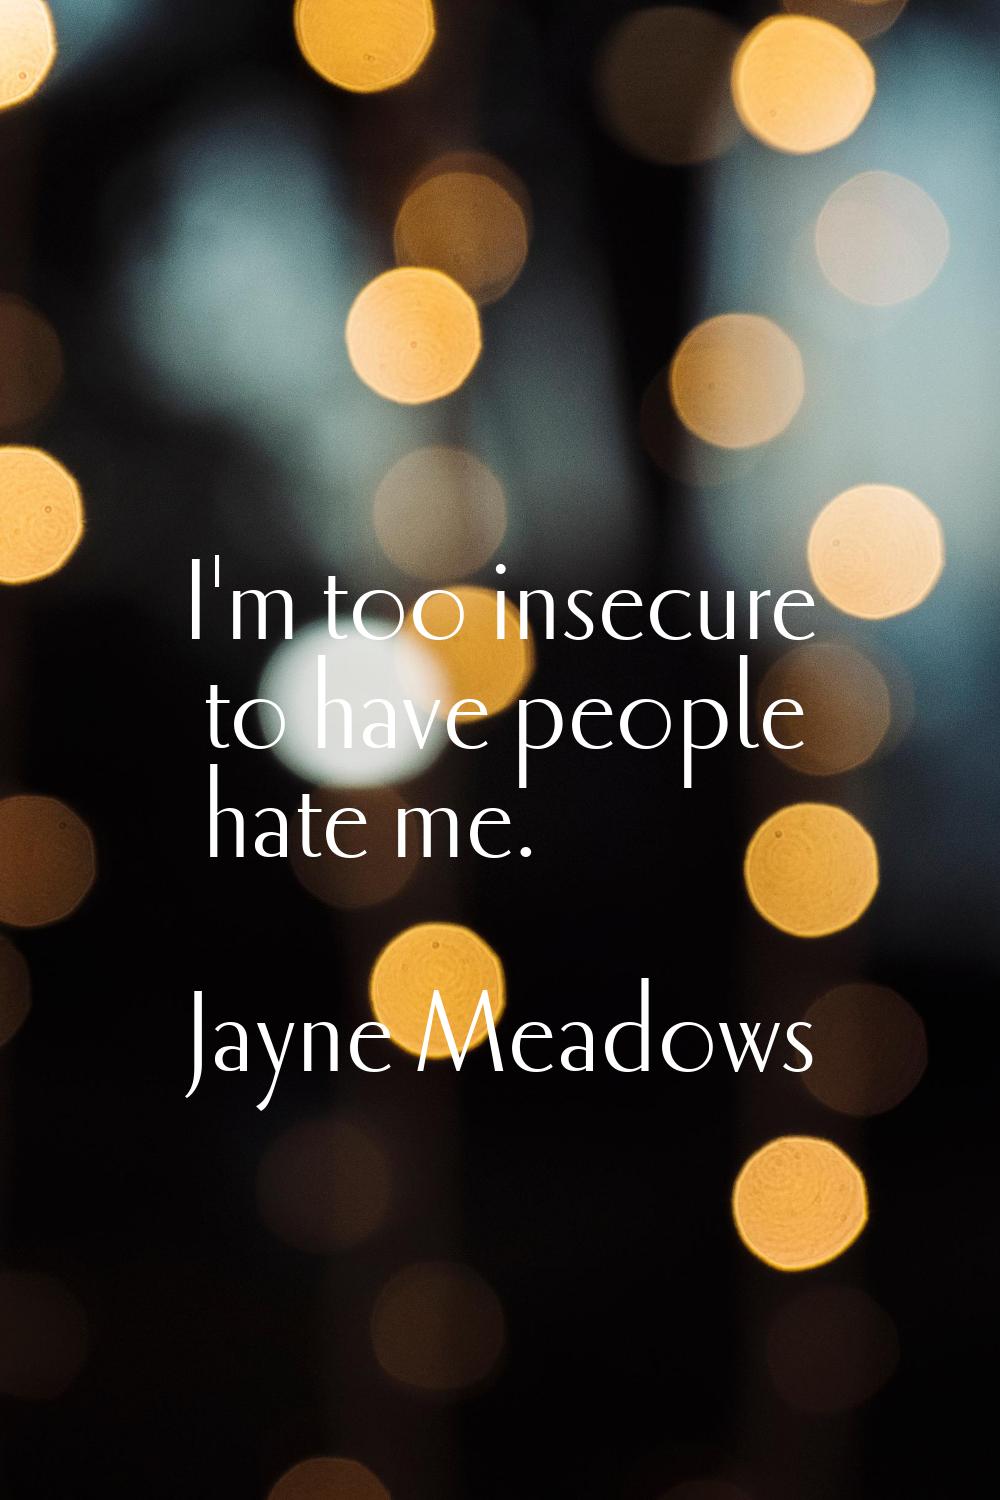 I'm too insecure to have people hate me.